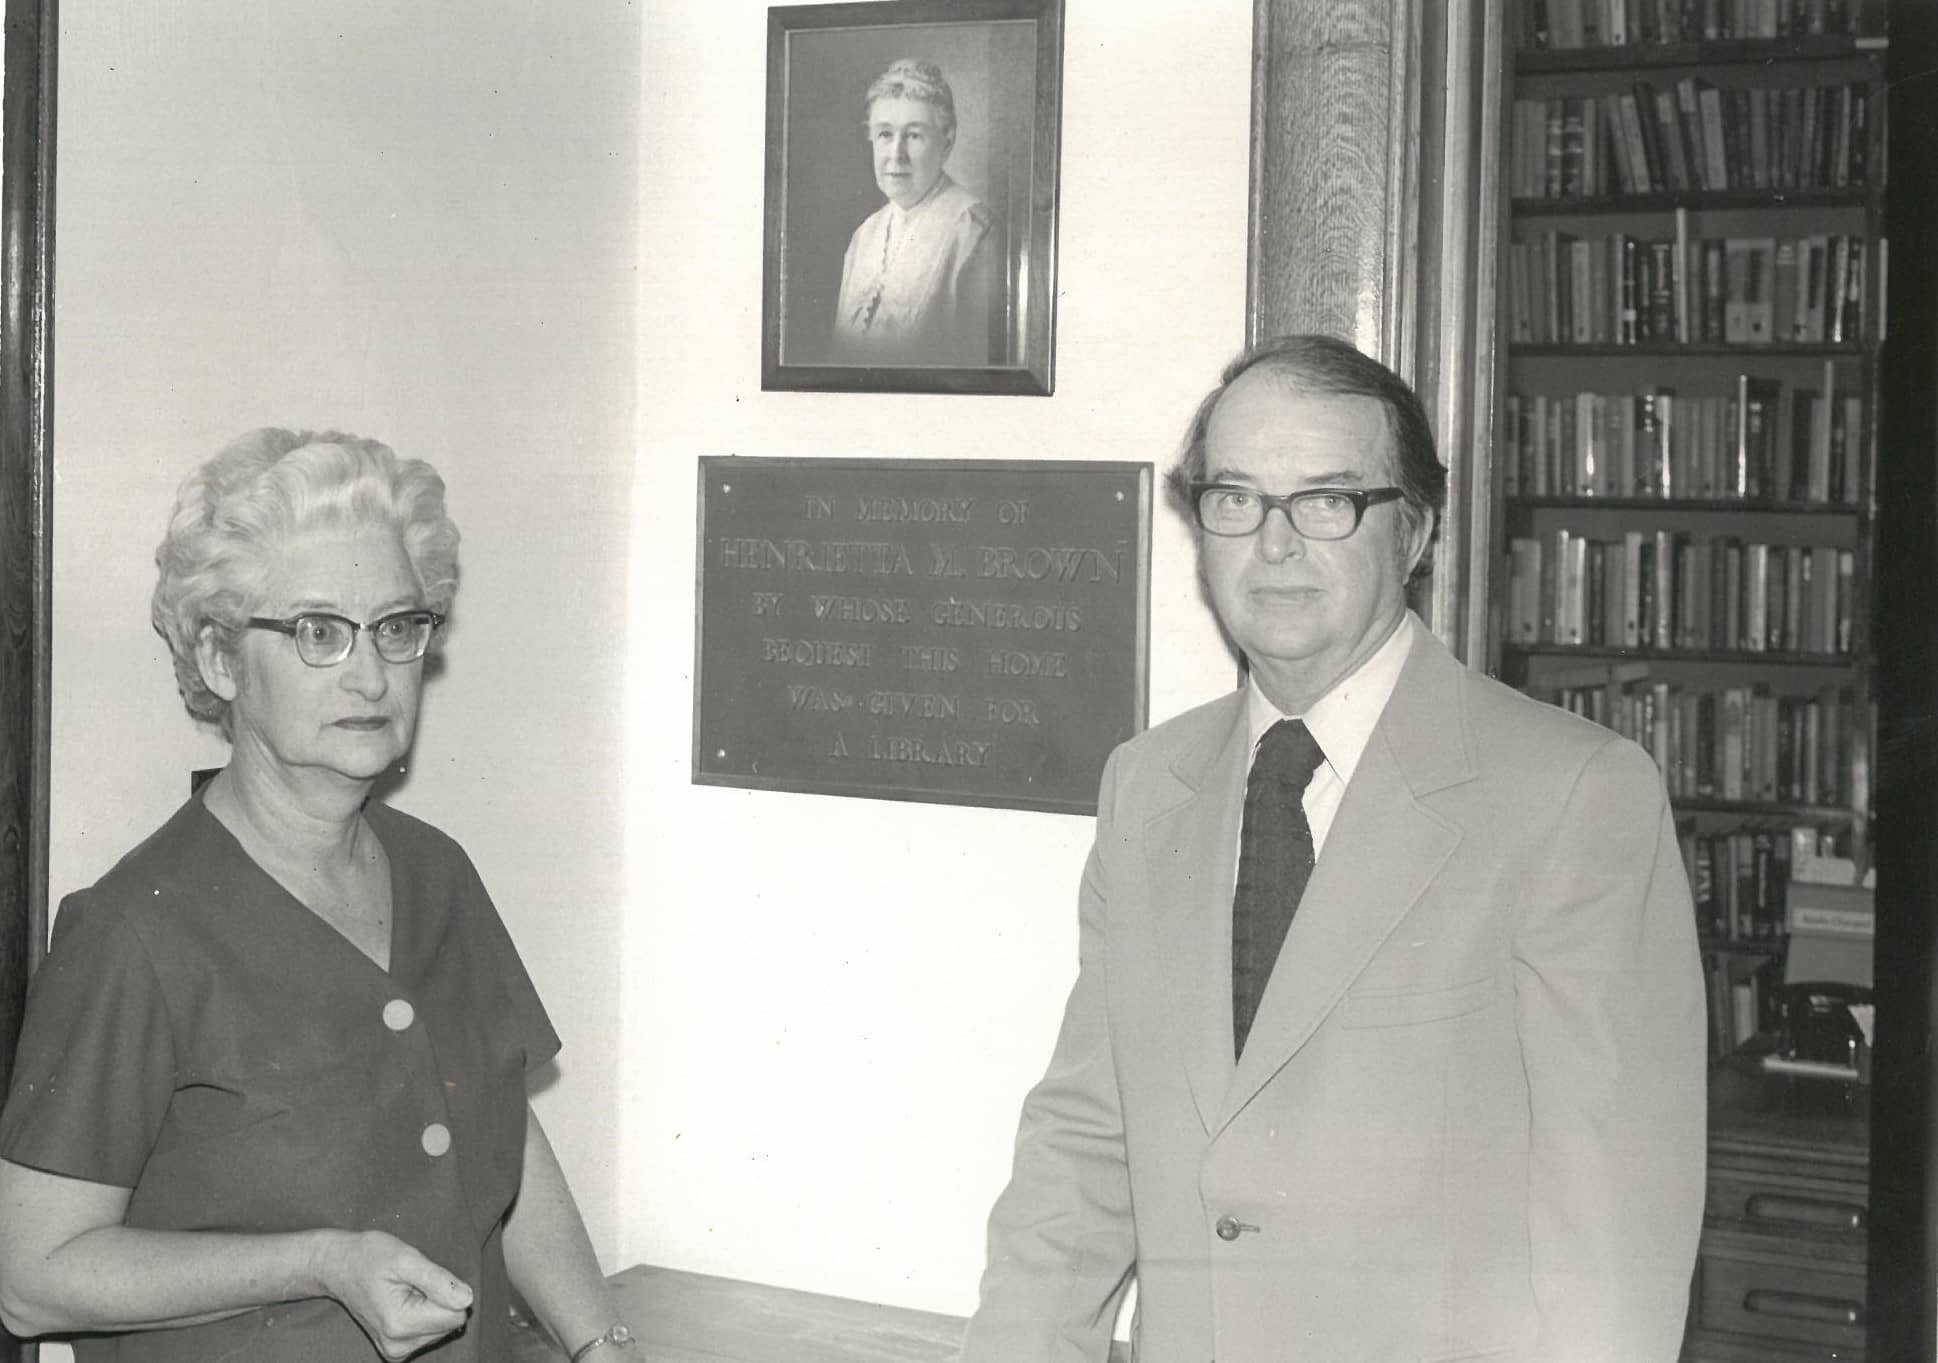 man and woman standing in front of plaque and photograph